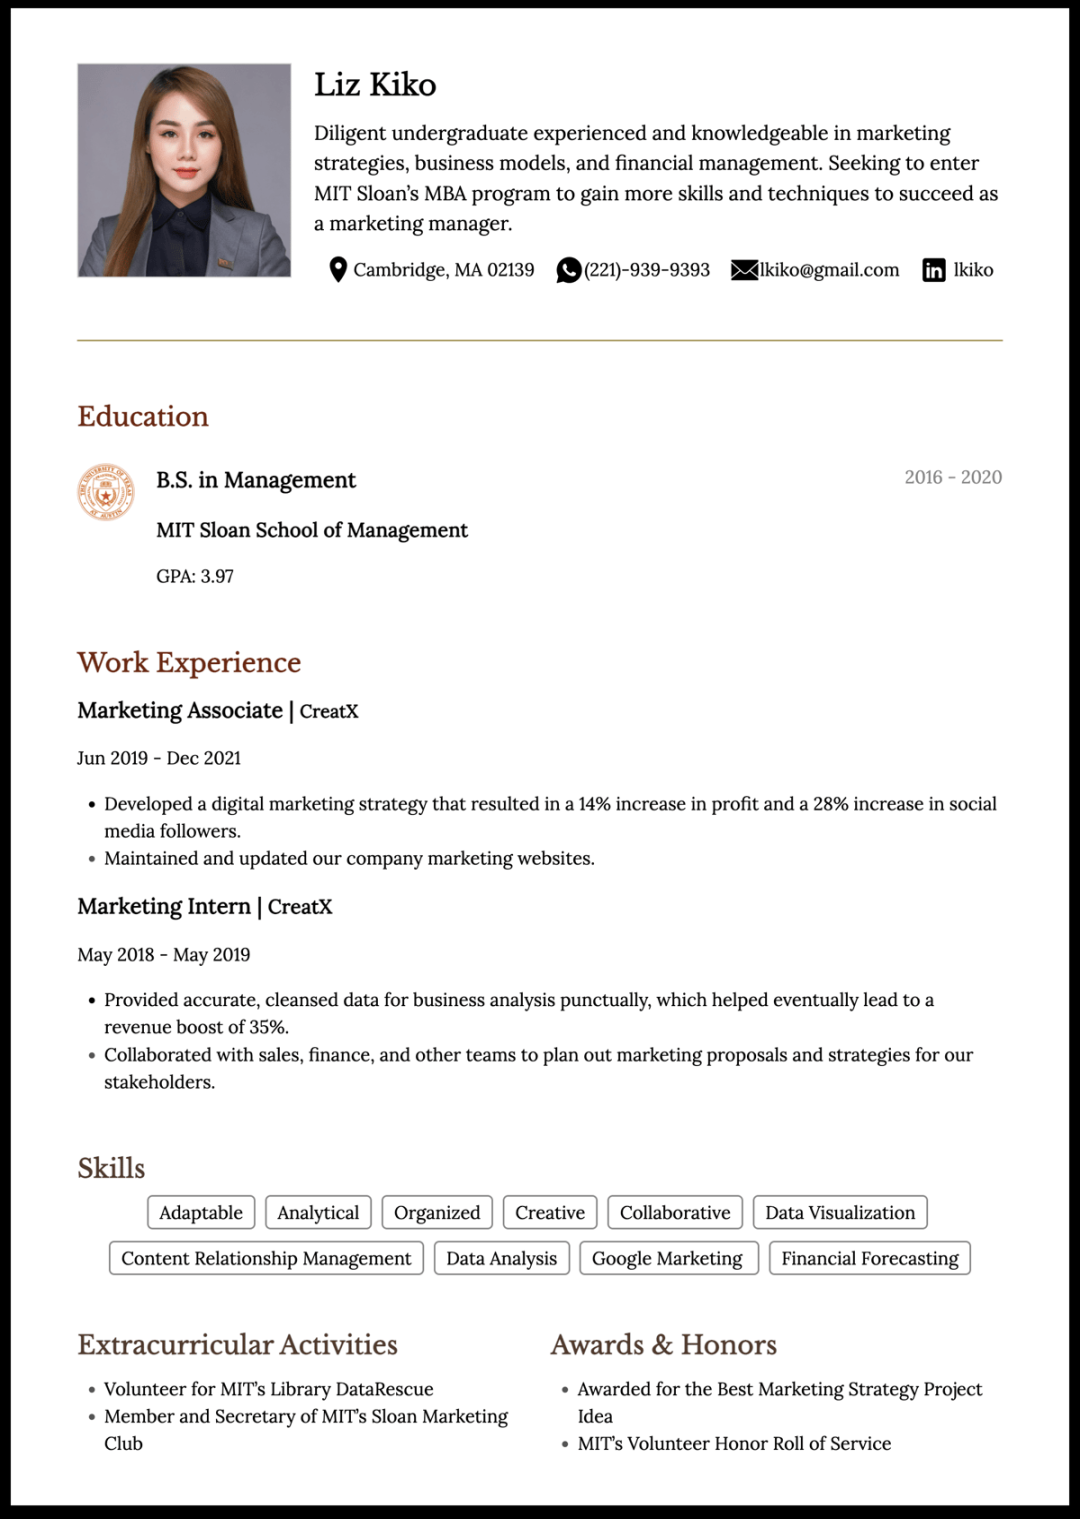 MBA Application Resume: Formats, Templates, and Examples  CakeResume